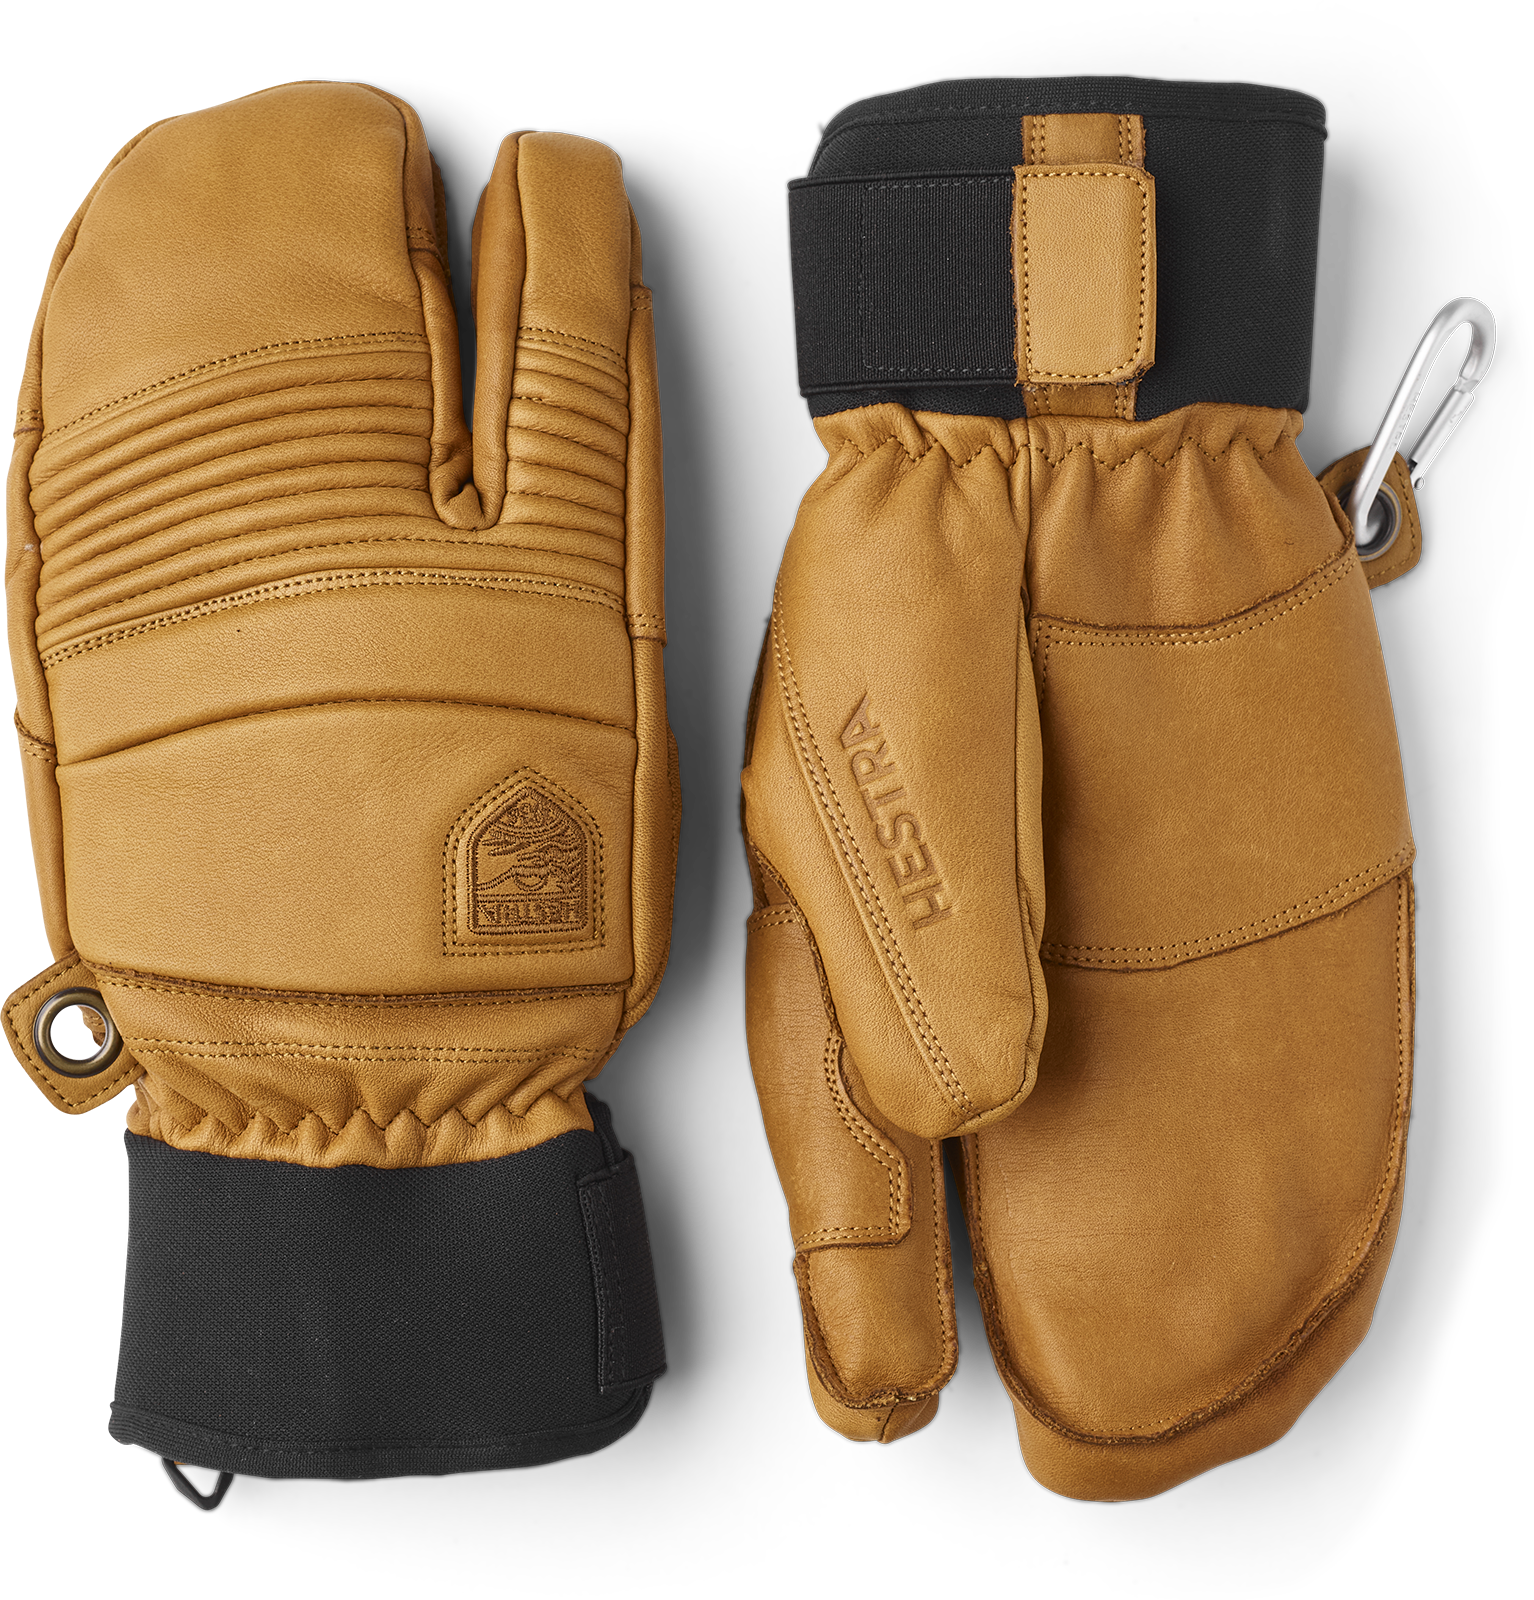 Short Freeride 3-Finger Snow Glove with Superior Grip for Skiing Snowboarding and Mountaineering Hestra Leather Fall Line 